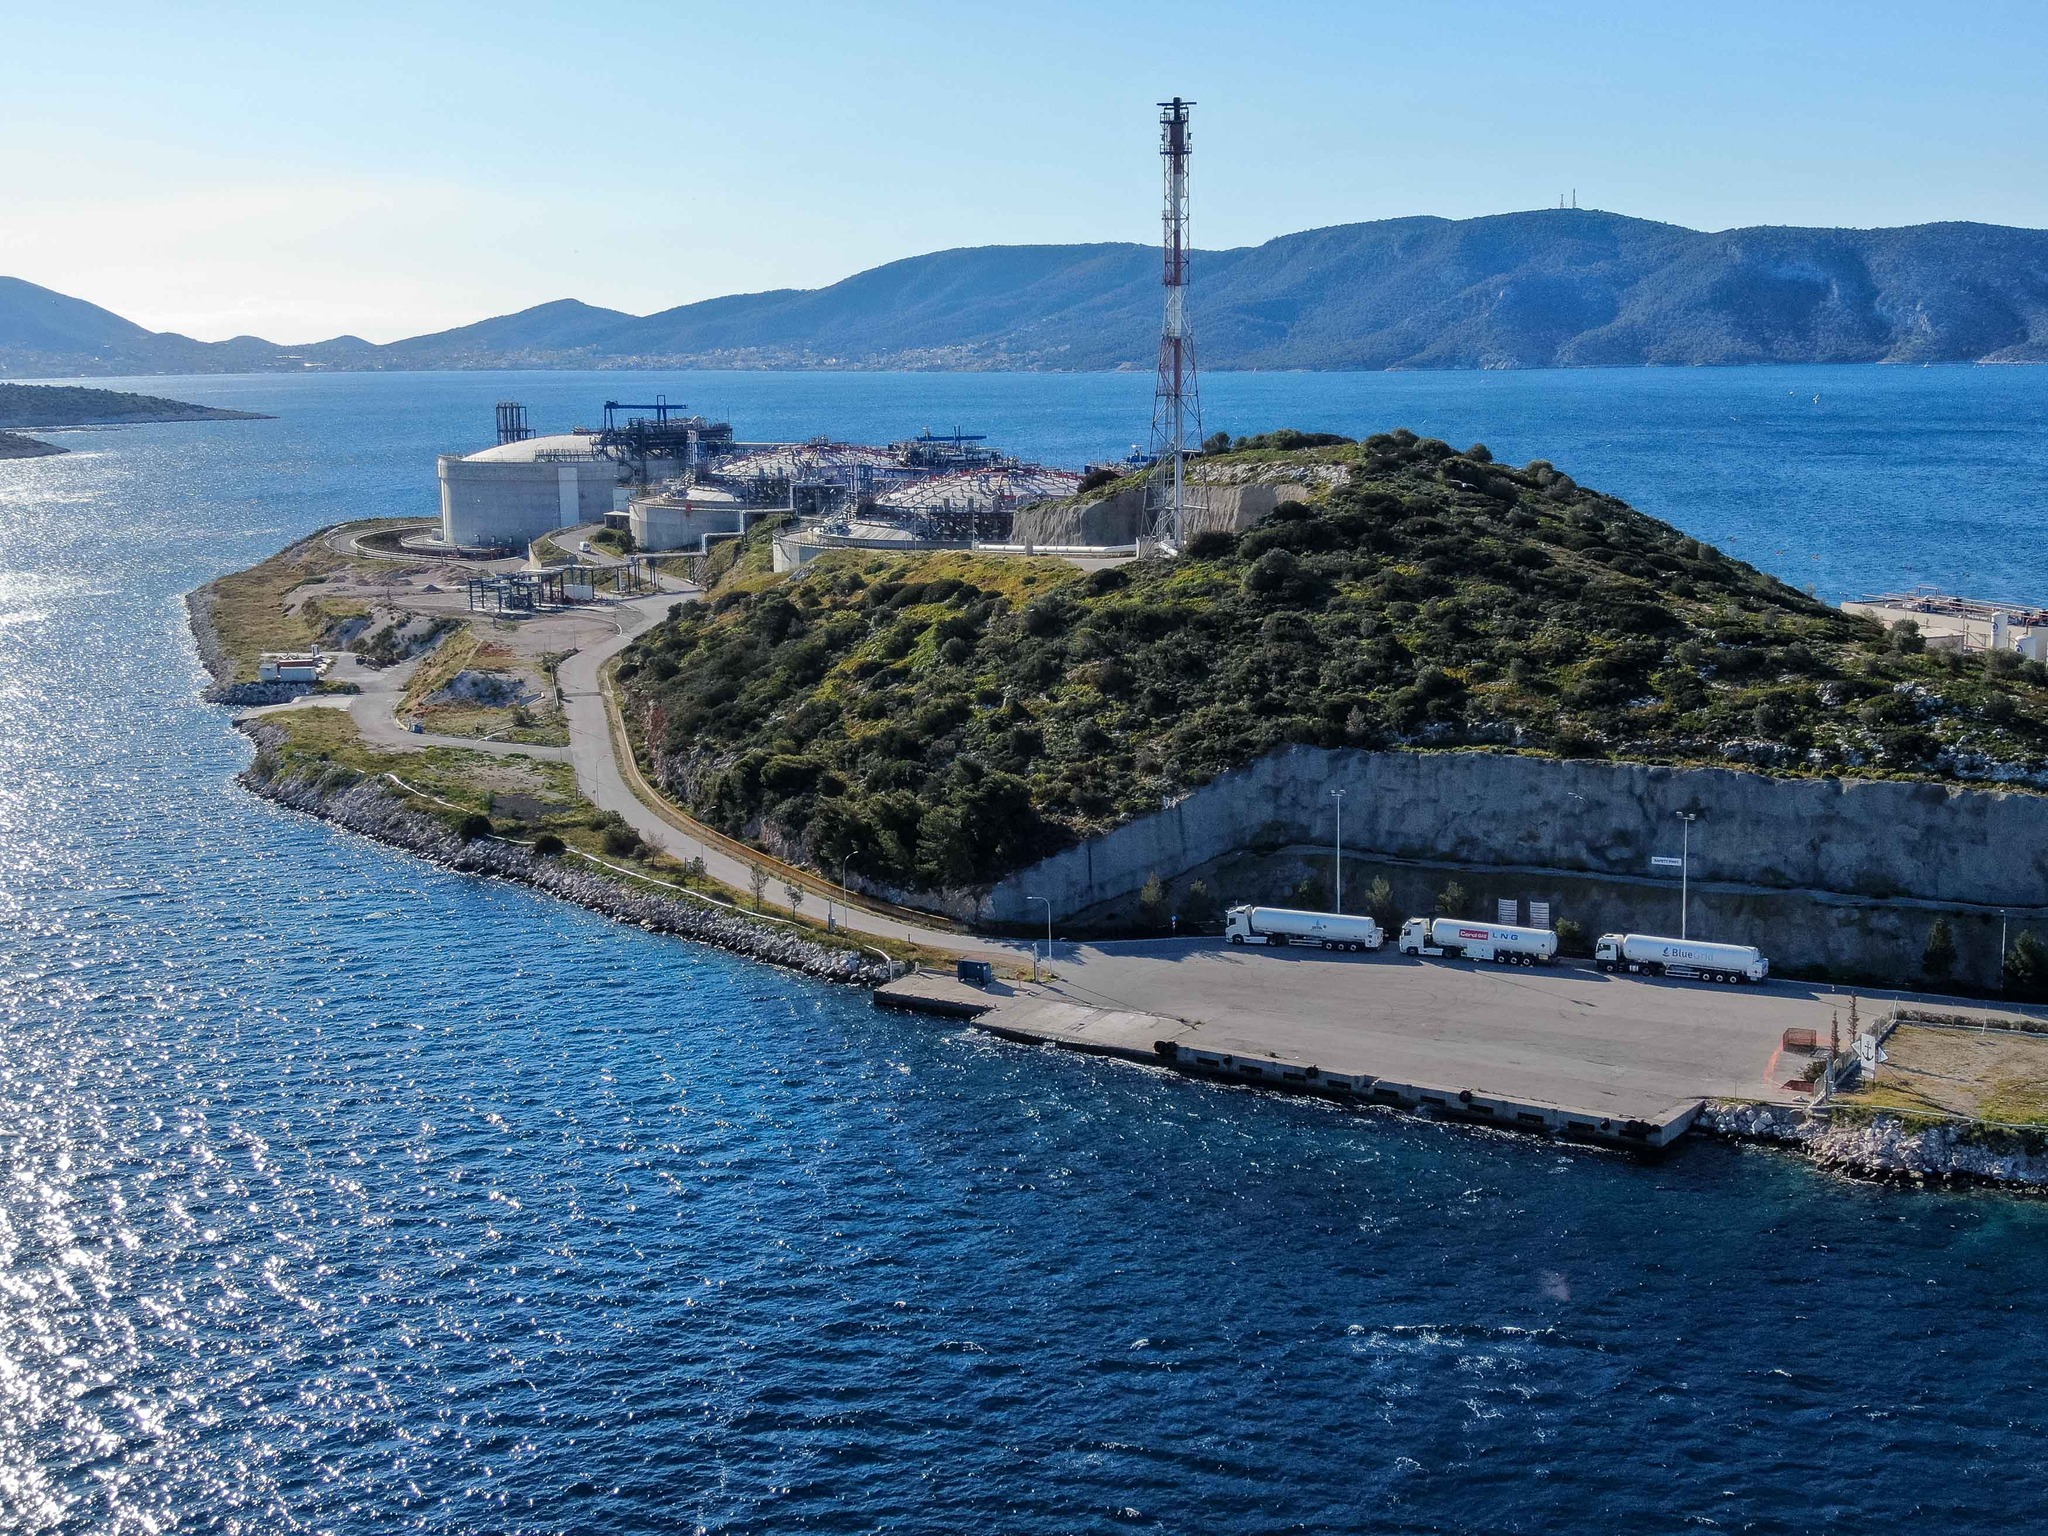 DESFA Greece received 13 LNG cargoes in Q1